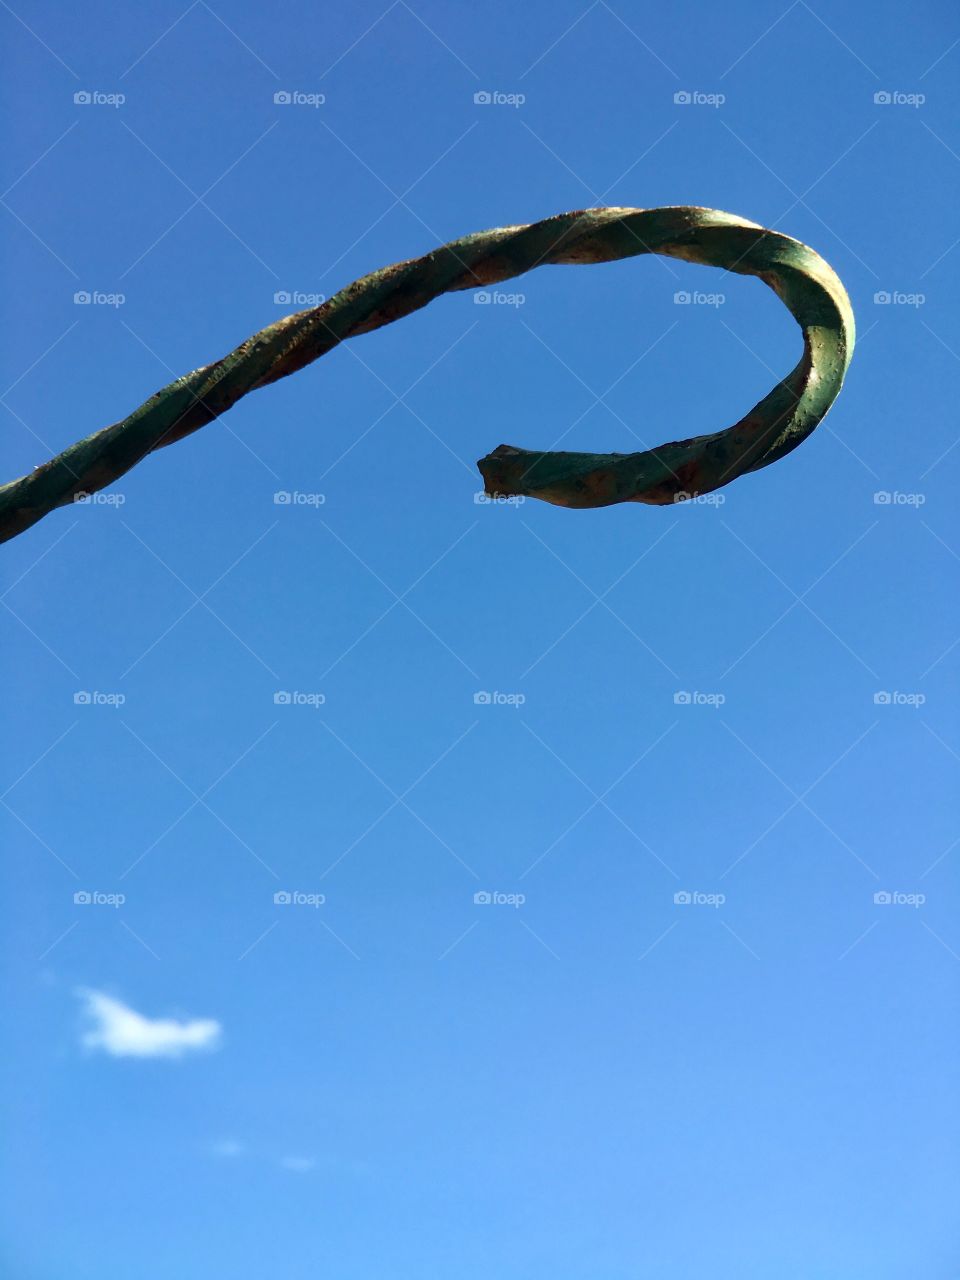 Curved wrought iron rod jutting out against vivid blue sky minimalist 